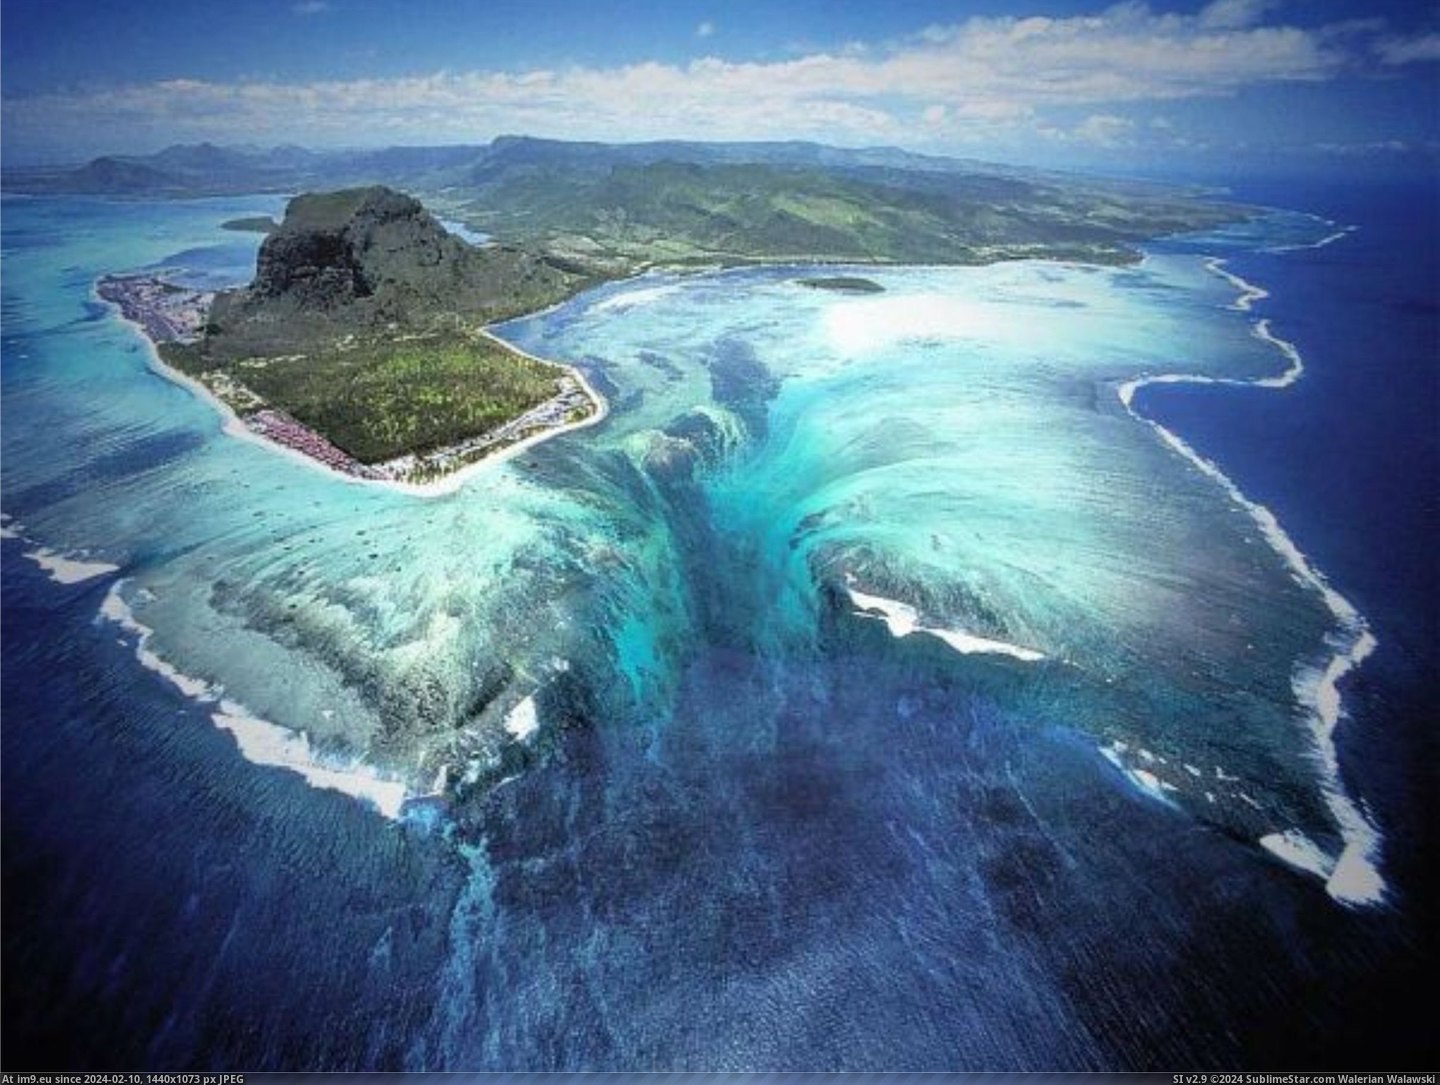 #Wallpapers #Island #Michael #Mauritius #Friedel #Underwater #Enormous #Plateau [Earthporn] Enormous underwater plateau - Island of Mauritius - by Michael Friedel [2420x1815] Pic. (Image of album My r/EARTHPORN favs))